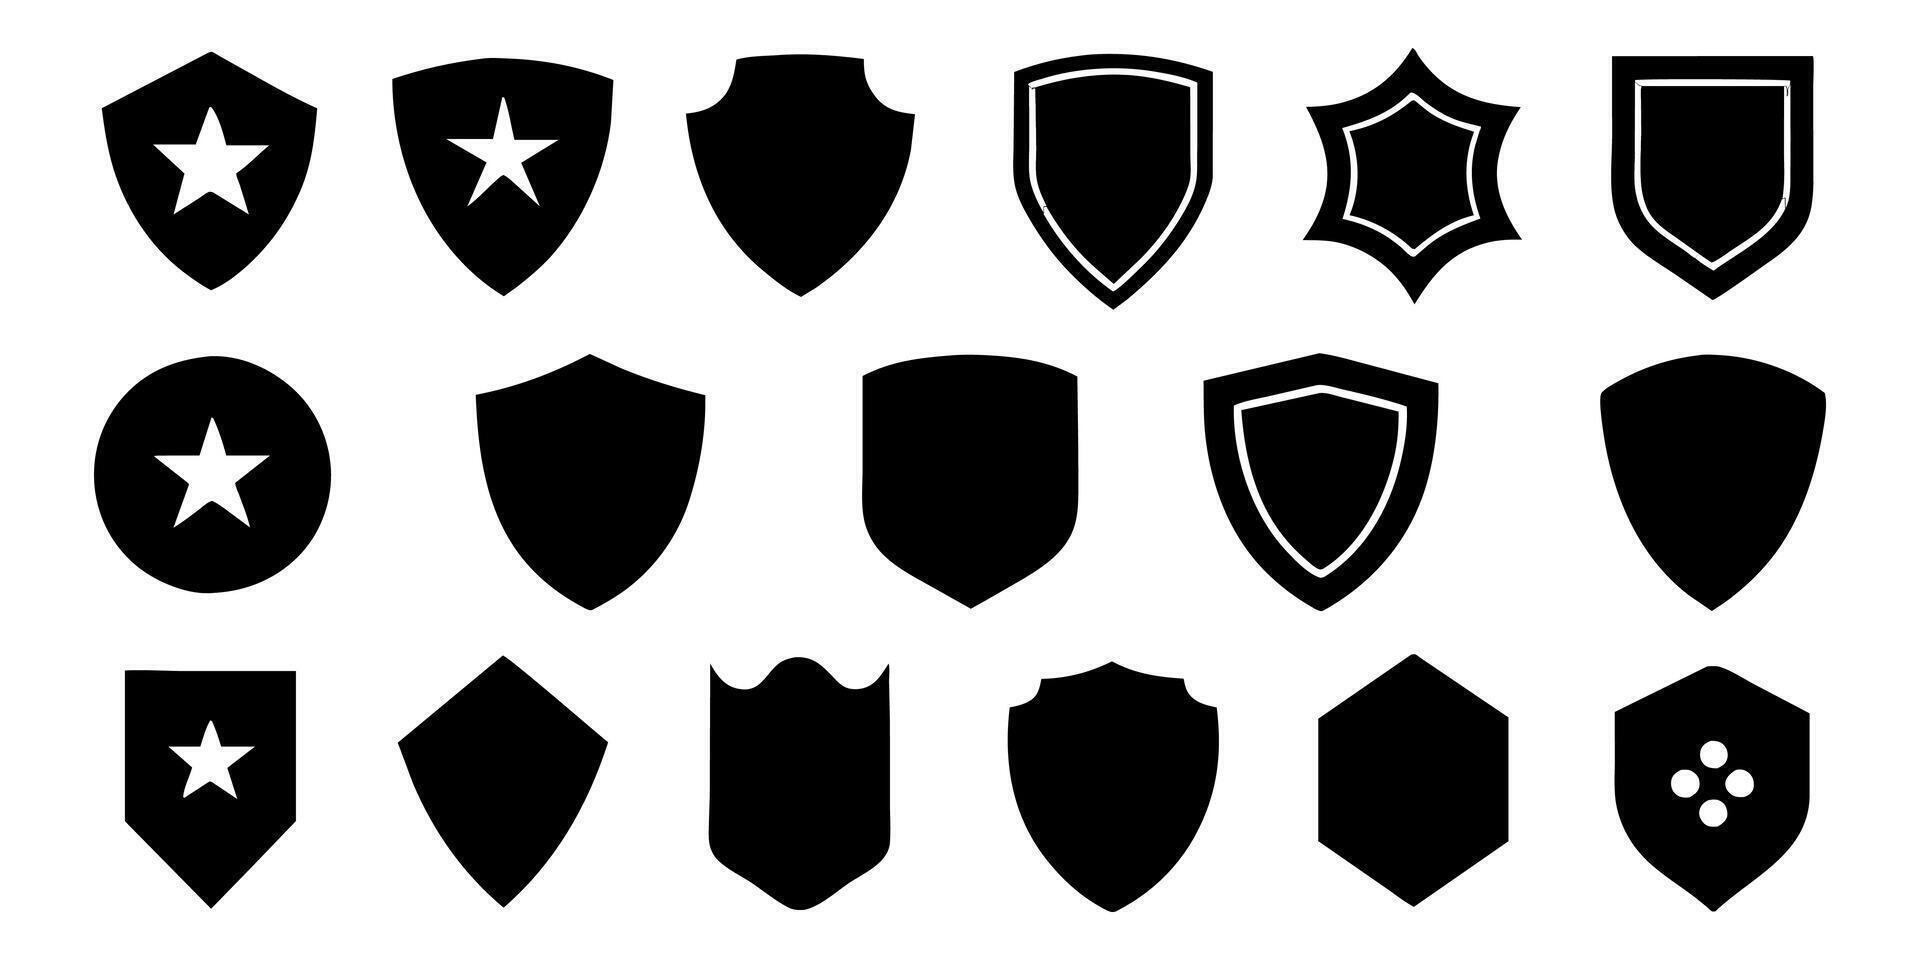 Beautiful set of shields silhouettes. Black badges shape label collection for military, police, soccer and others. vector